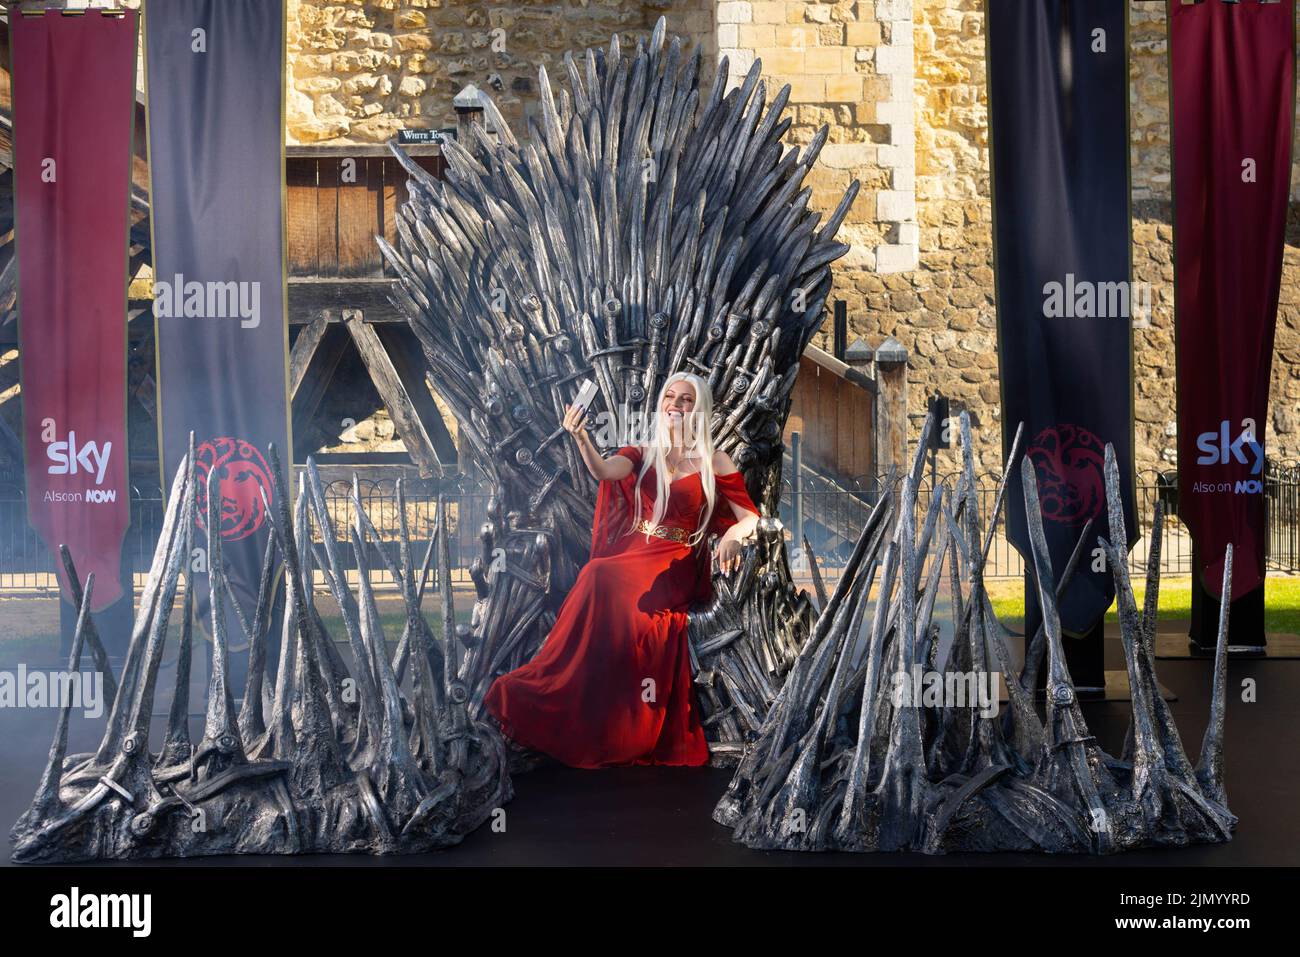 EDITORIAL USE ONLY Cosplayer and super fan Sophia sits on the Iron Throne outside the Tower of London to mark the launch of the Game of Thrones prequel, House of the Dragon, airing on Sky and streaming service NOW from August 22. PA PHOTO Picture date: Monday August 8, 2022.. The throne is being displayed at the Tower of London today and tomorrow, ahead of the House of the Dragon premiere next week in Leicester Square. Fans and Visitors to the Tower of London will be able to discover more about the news series via a QR code next to the Iron Throne. The Throne will then be touring the country,  Stock Photo